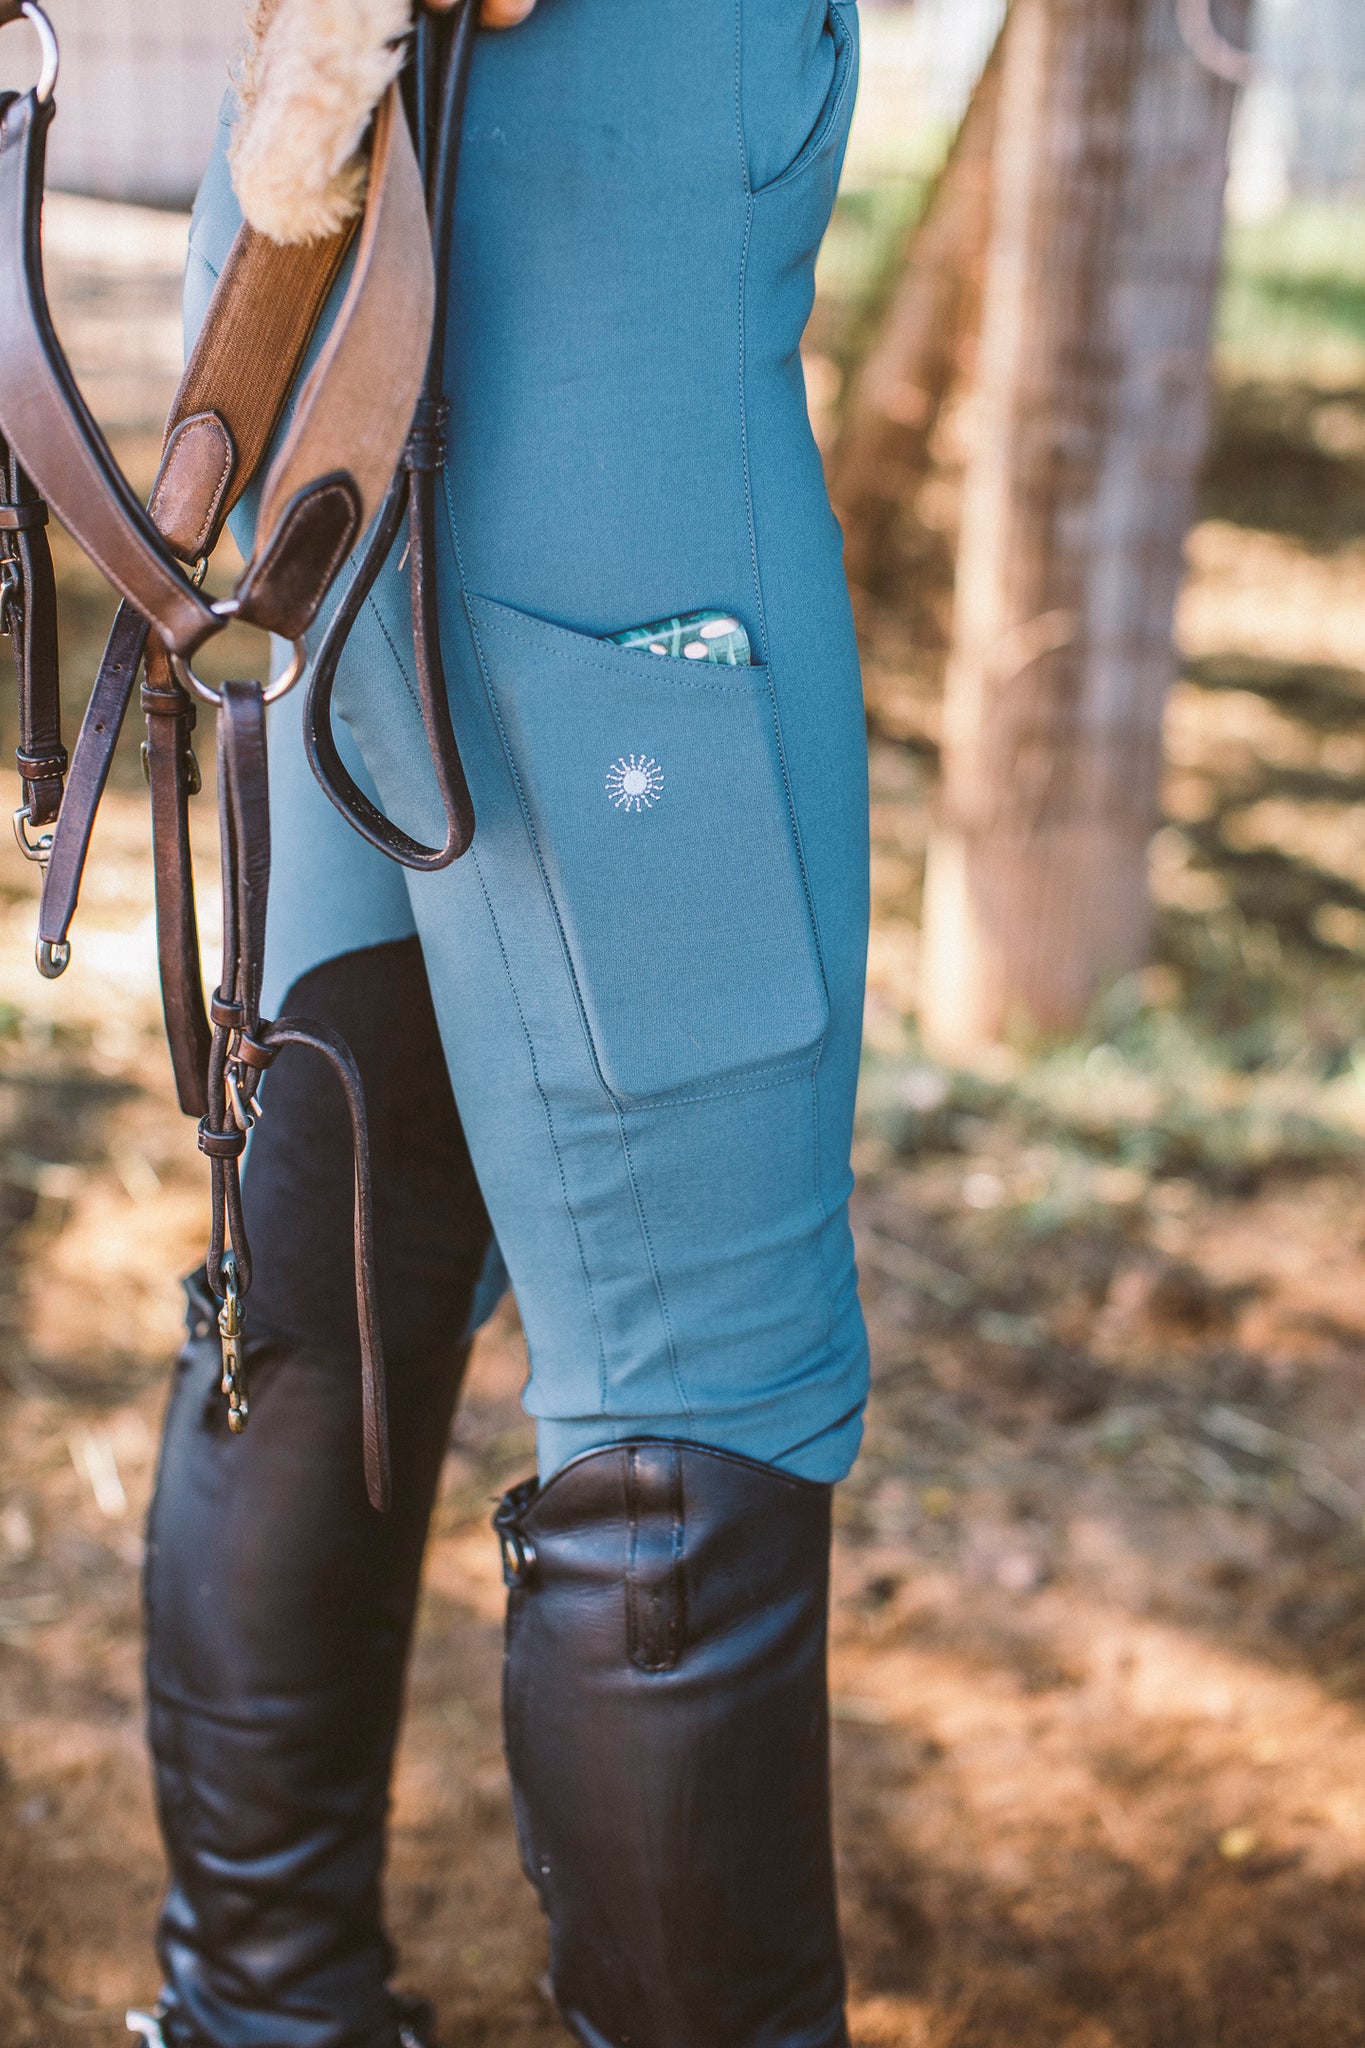 breeches feature a thigh pocket for phone